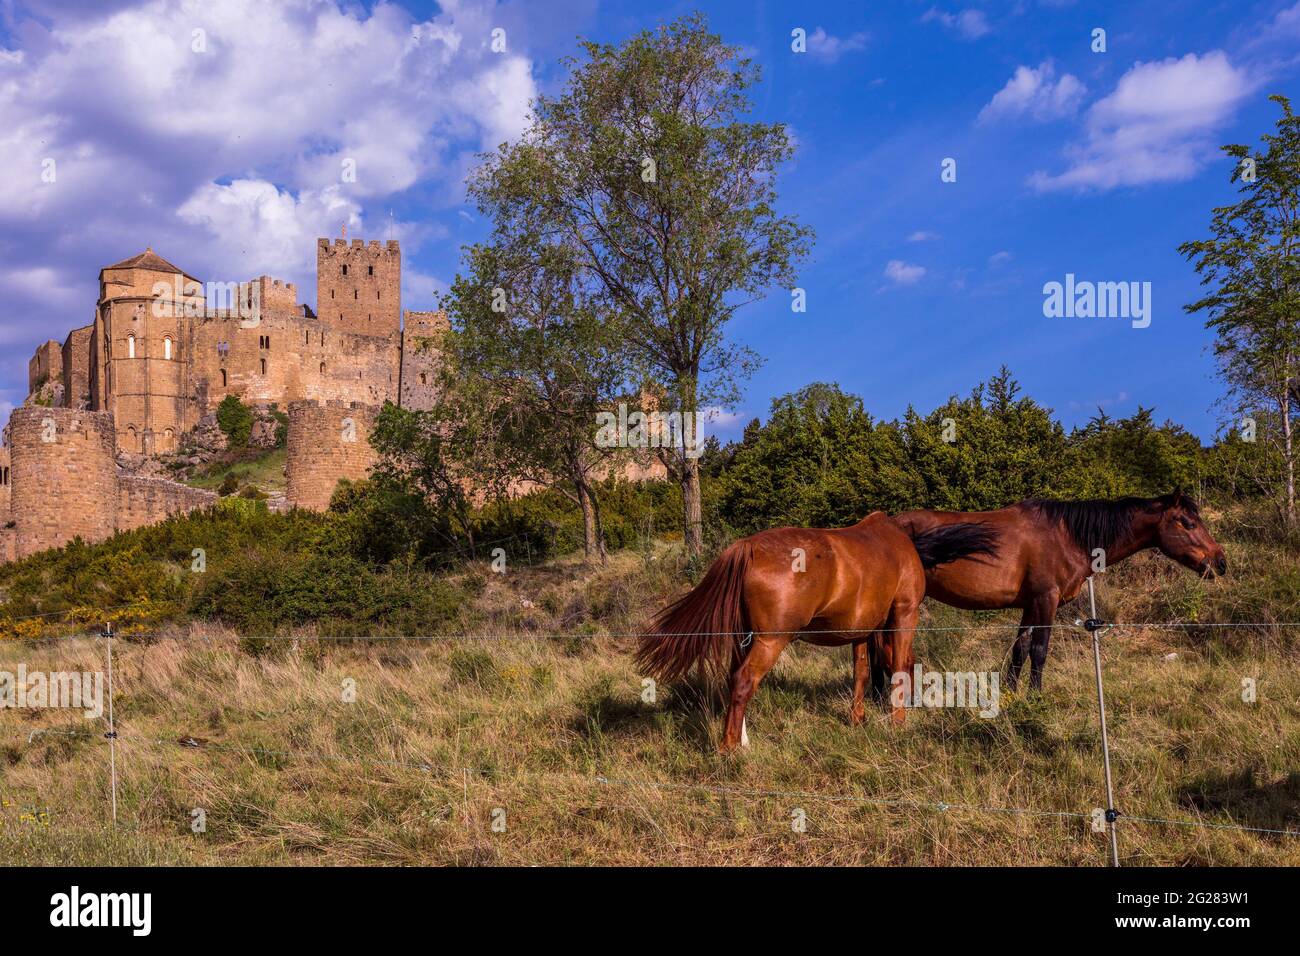 Loarre Castle, a medieval fortress built on top of a hill in Huesca, Spain. Inside the walls it holds a church. Two horses eat grass around the castle Stock Photo